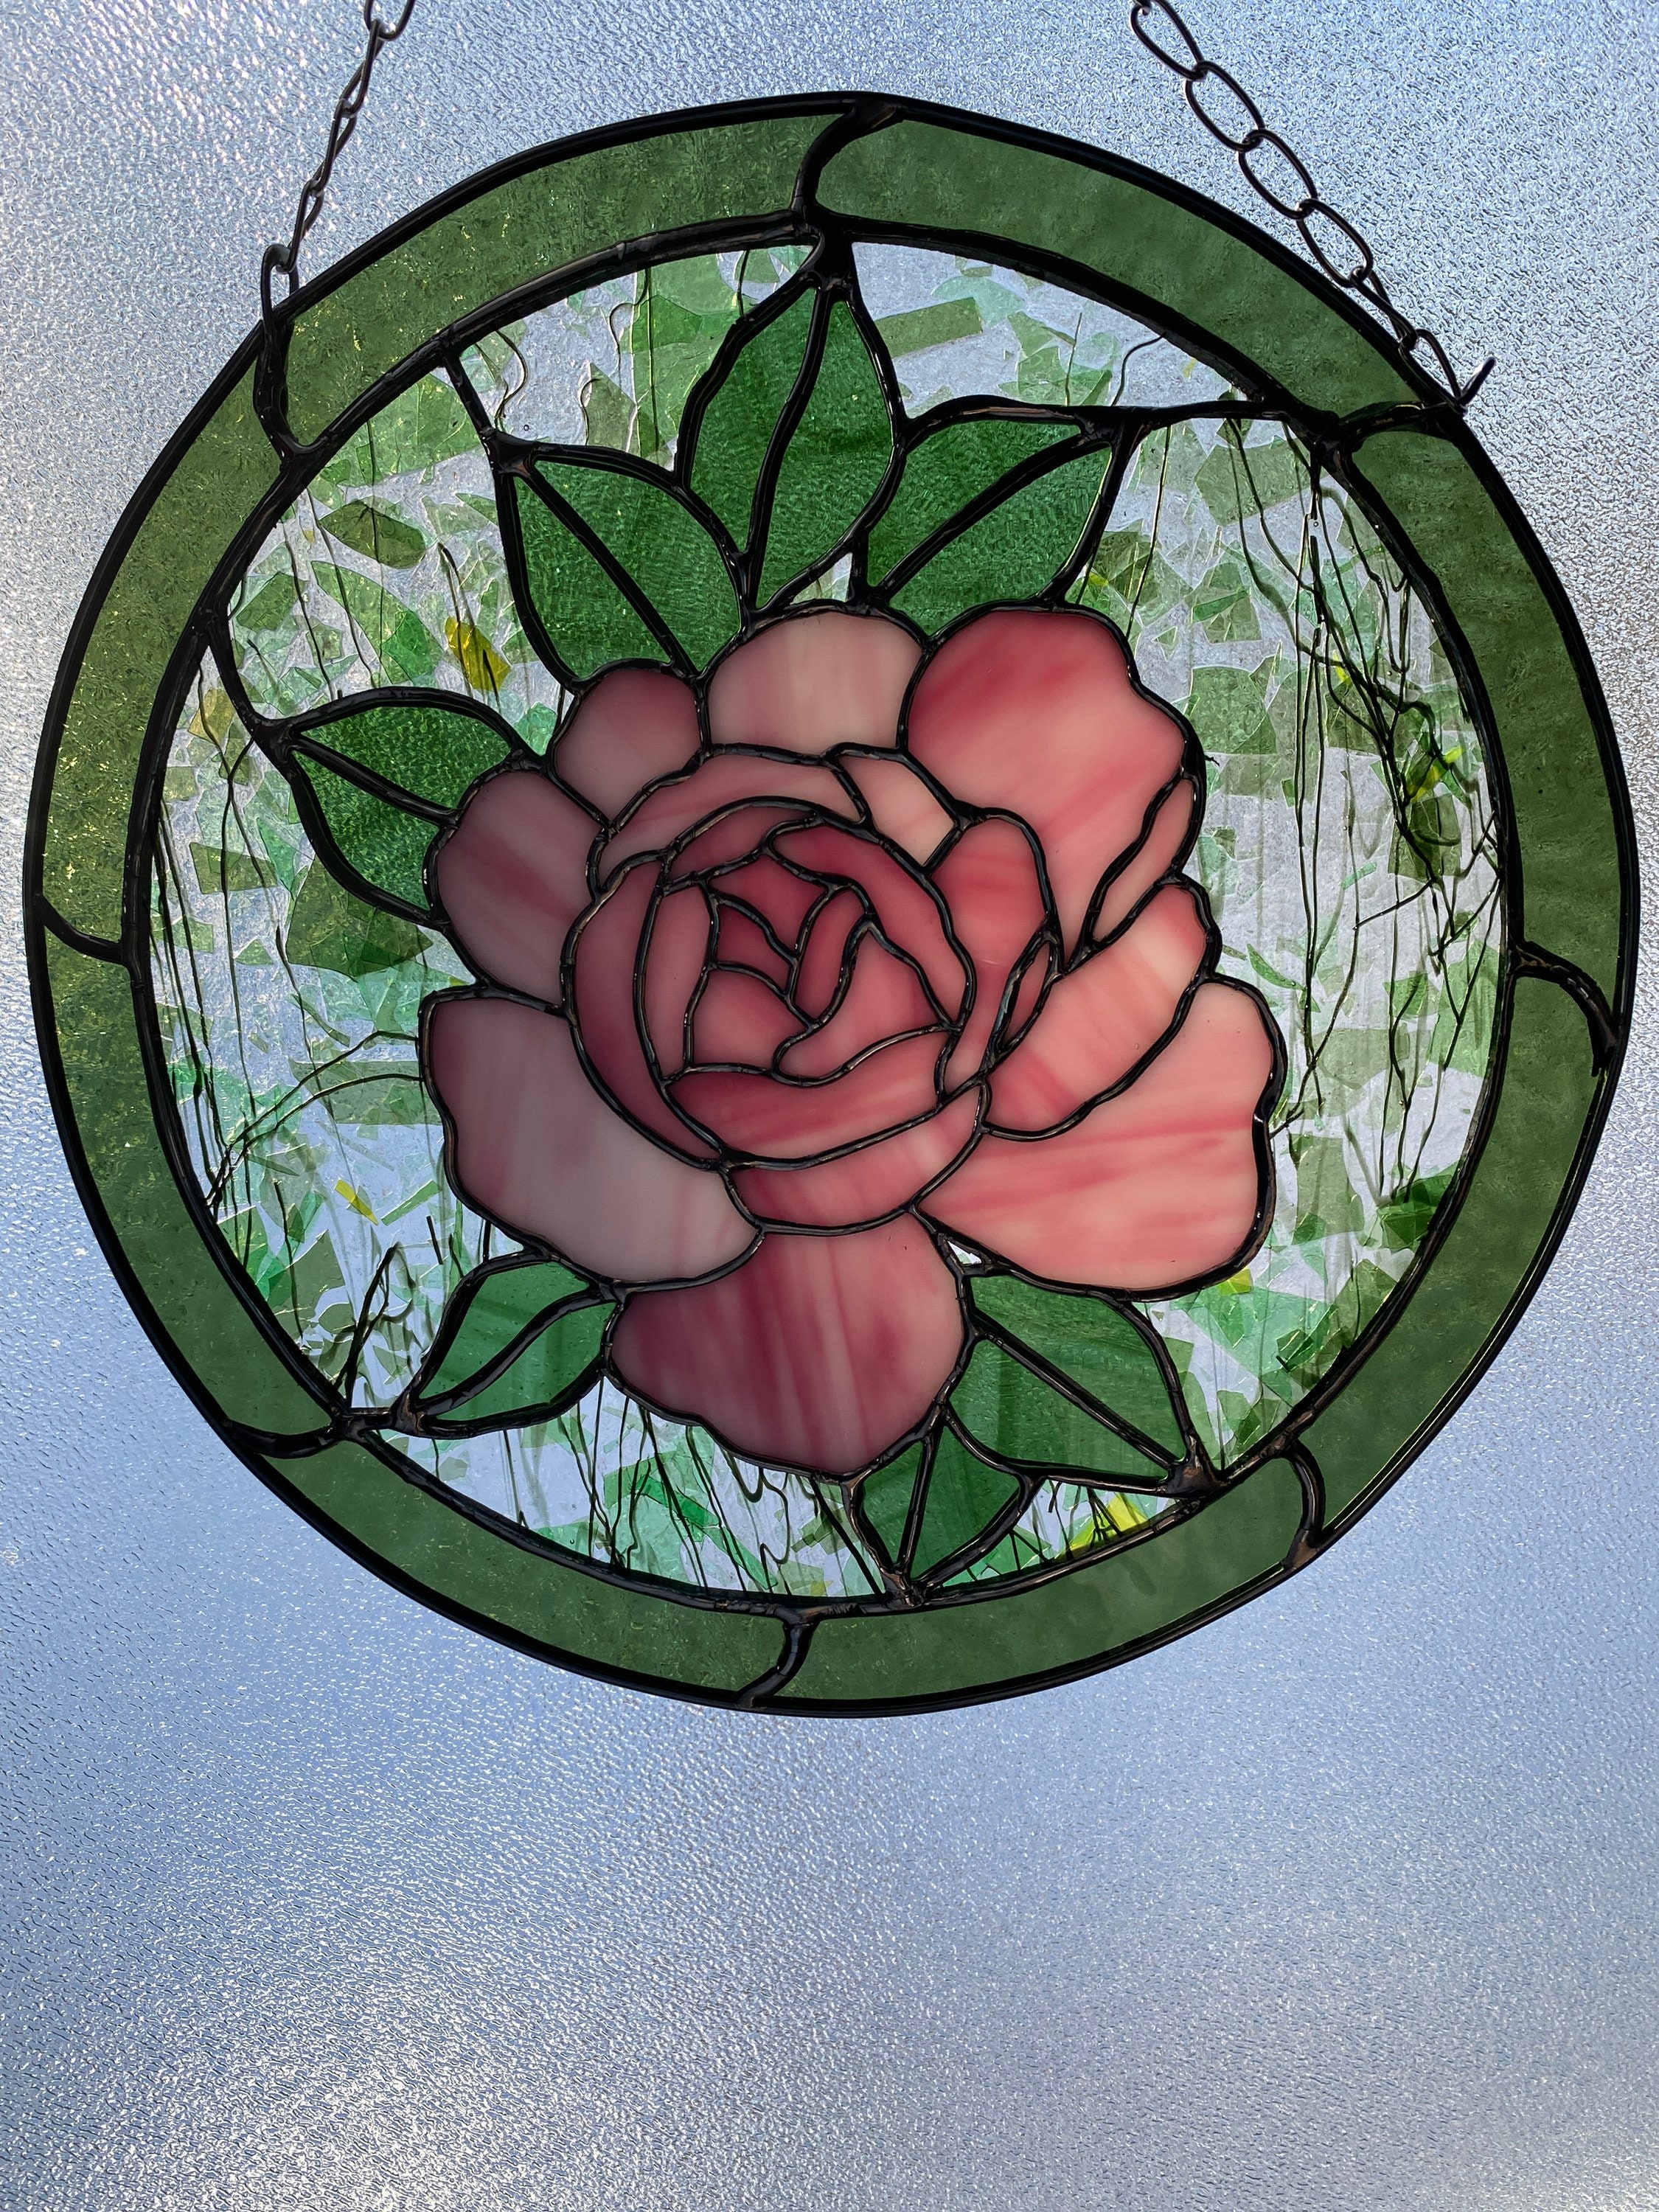 FAUX Stained Glass-219pc- Precut Kit for Adults - Skill 3 - ROSES Suncatcher